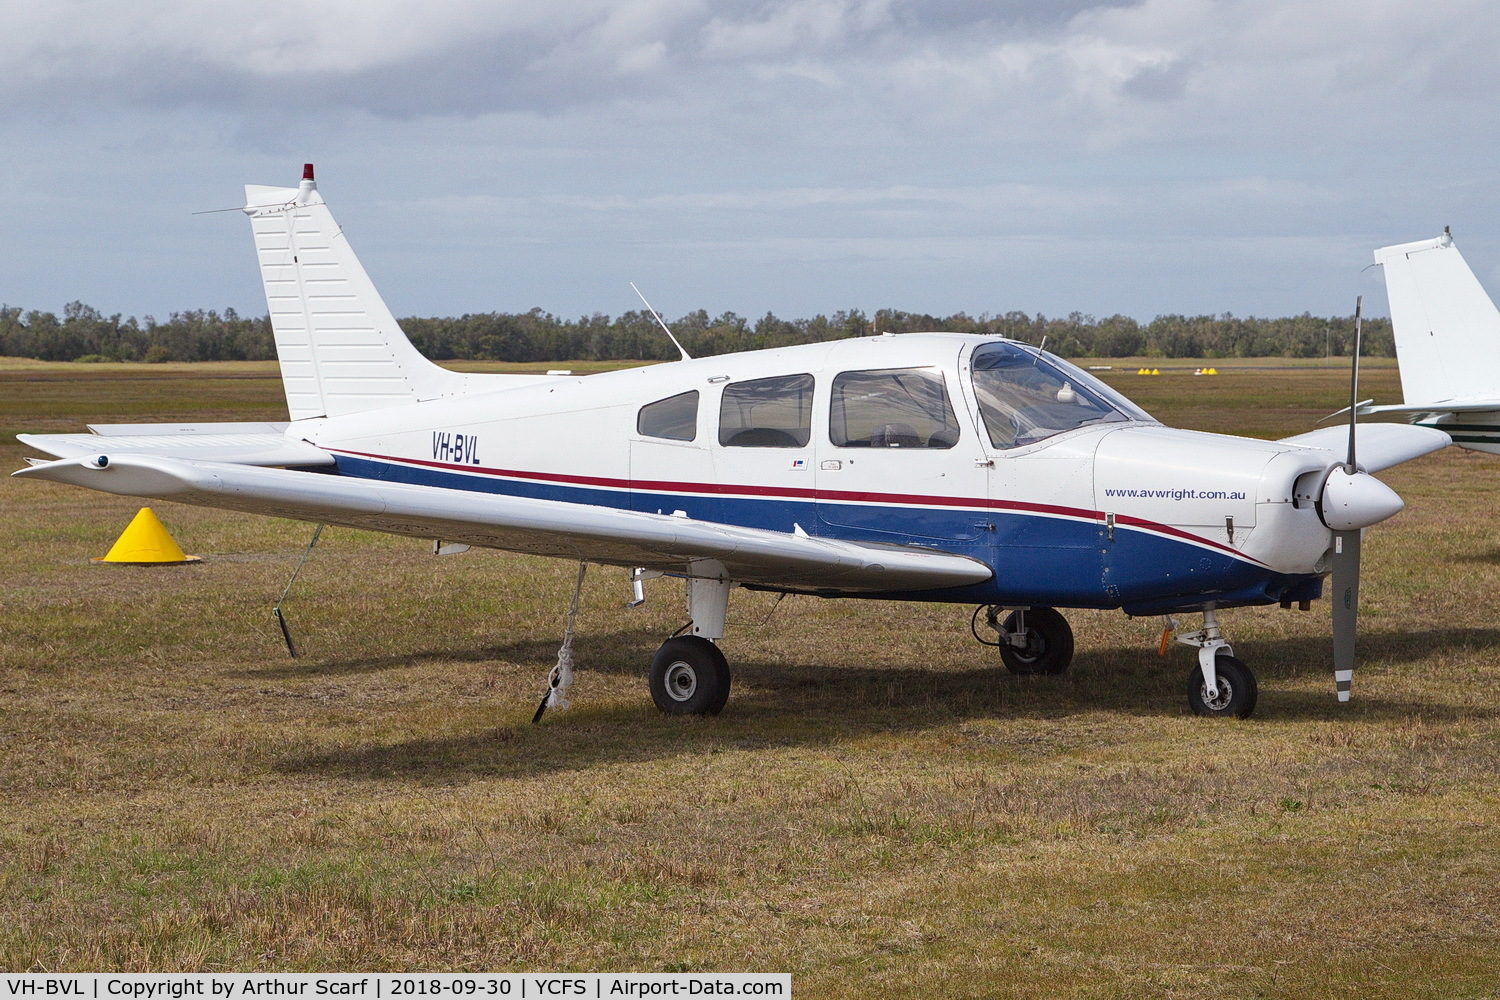 VH-BVL, 1979 Piper PA-28-161 C/N 28-8016232, Coffs Harbour Airport 2018